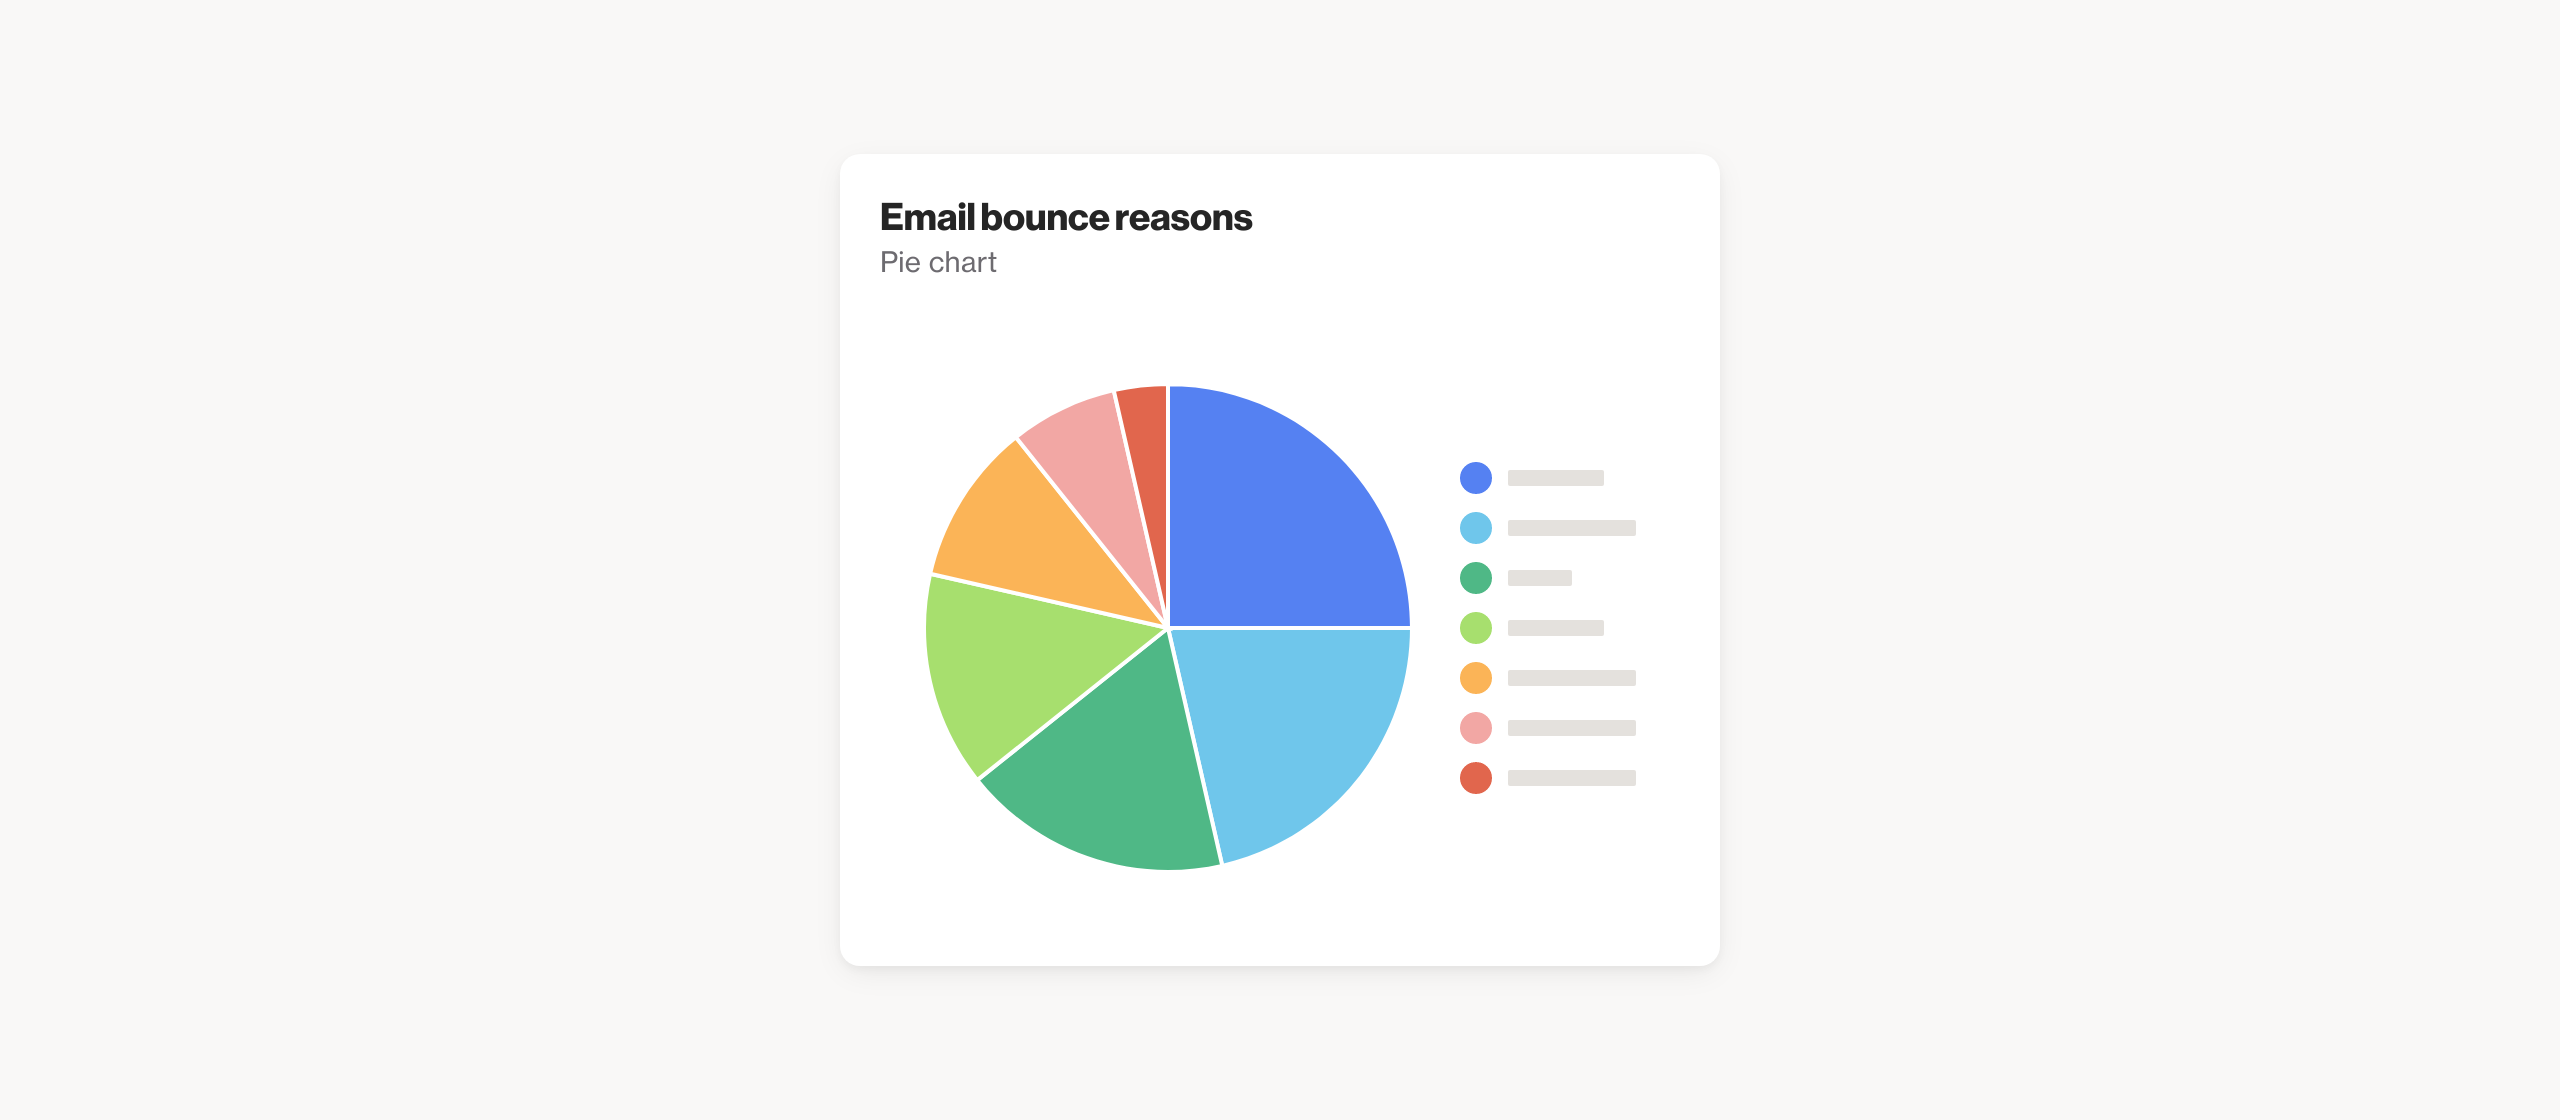 Email bounce reasons